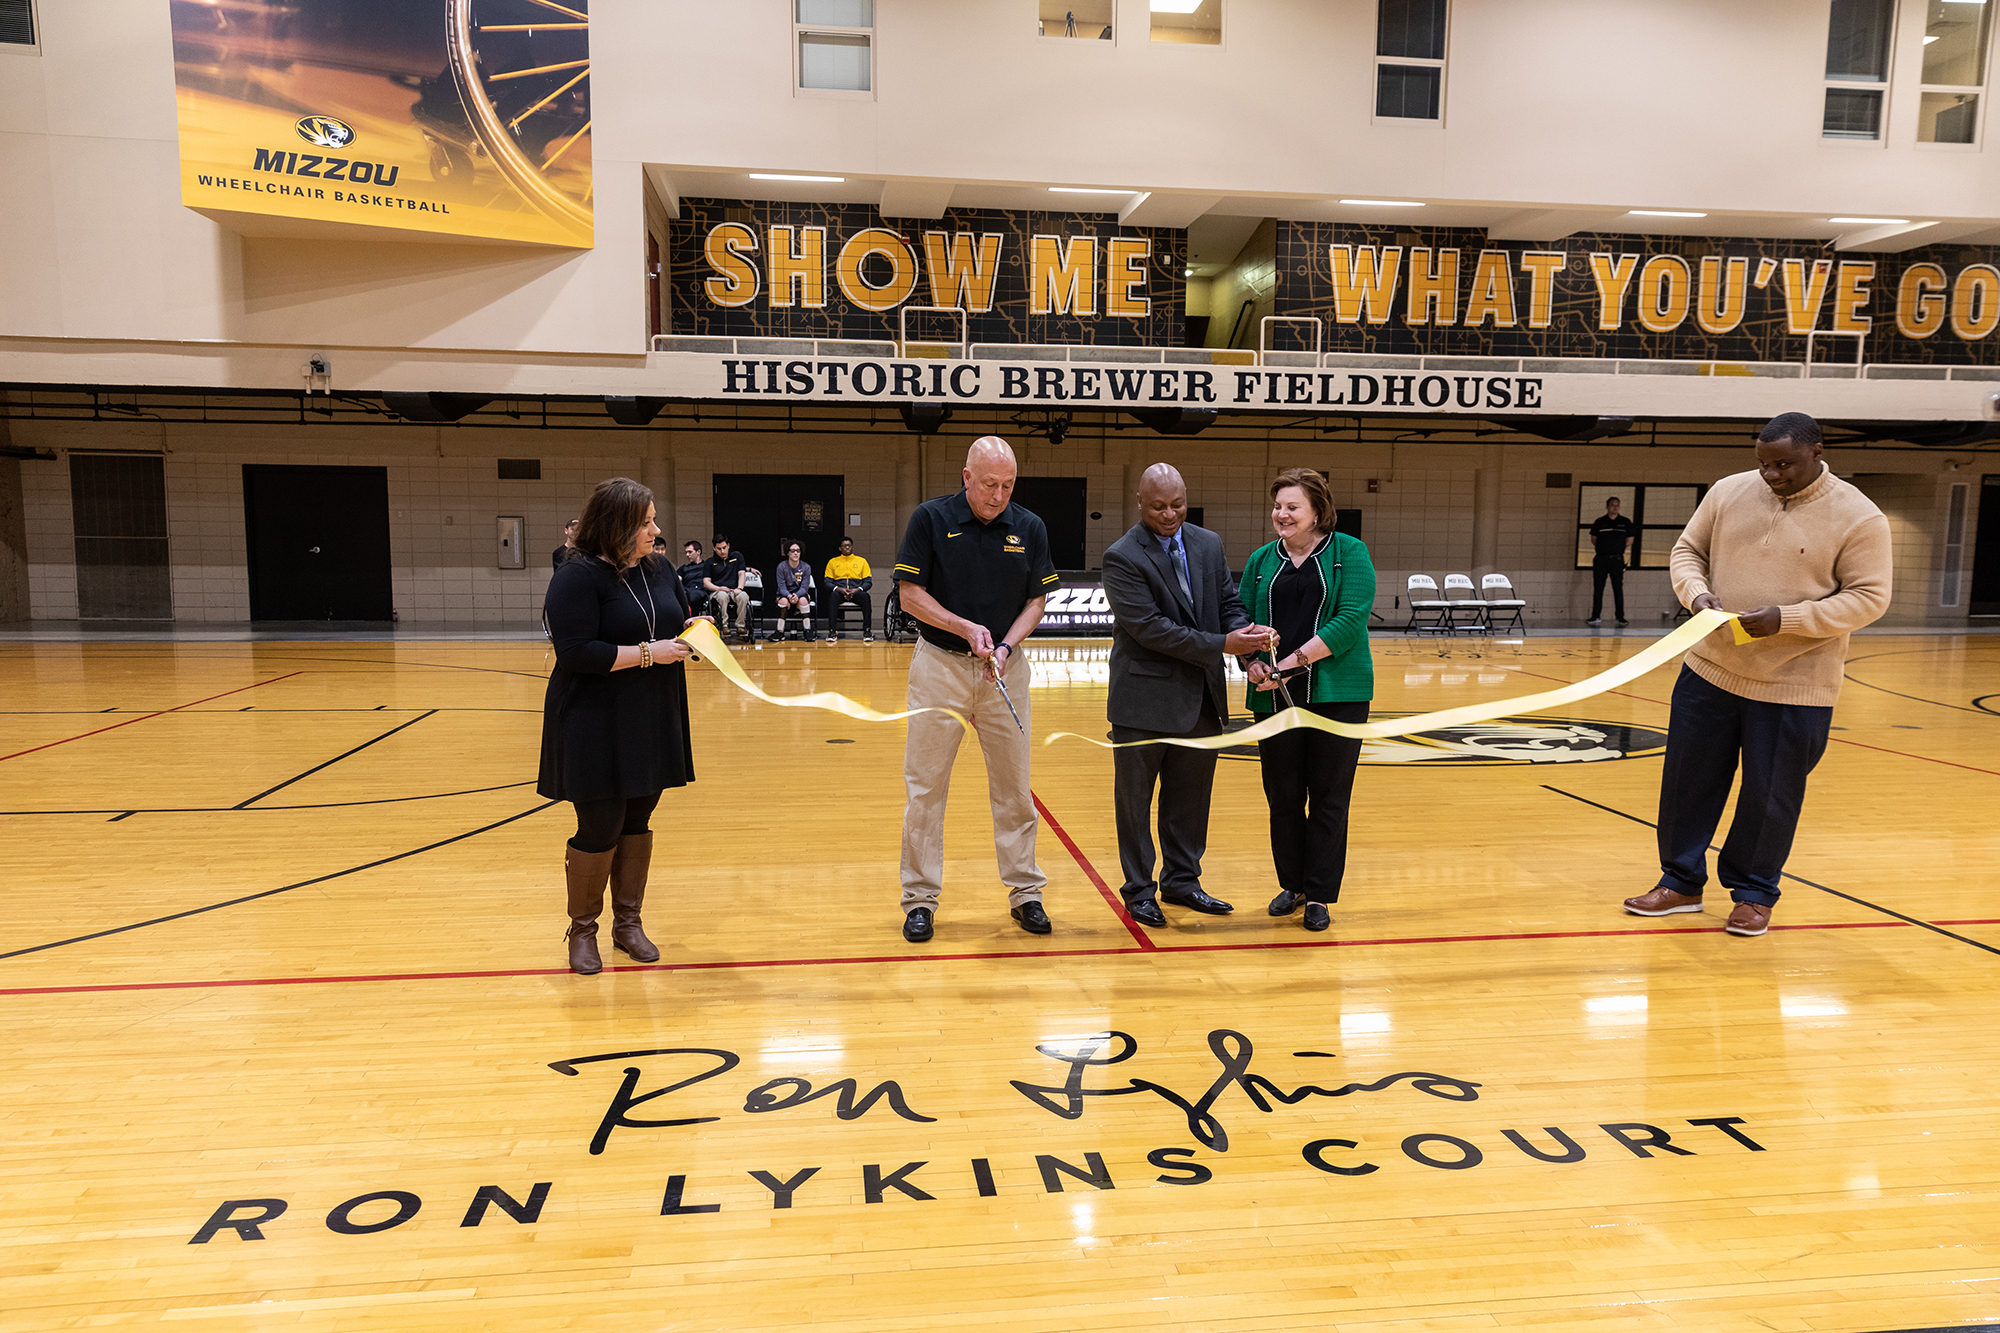 coach lykins and others cut a ribbon at the event